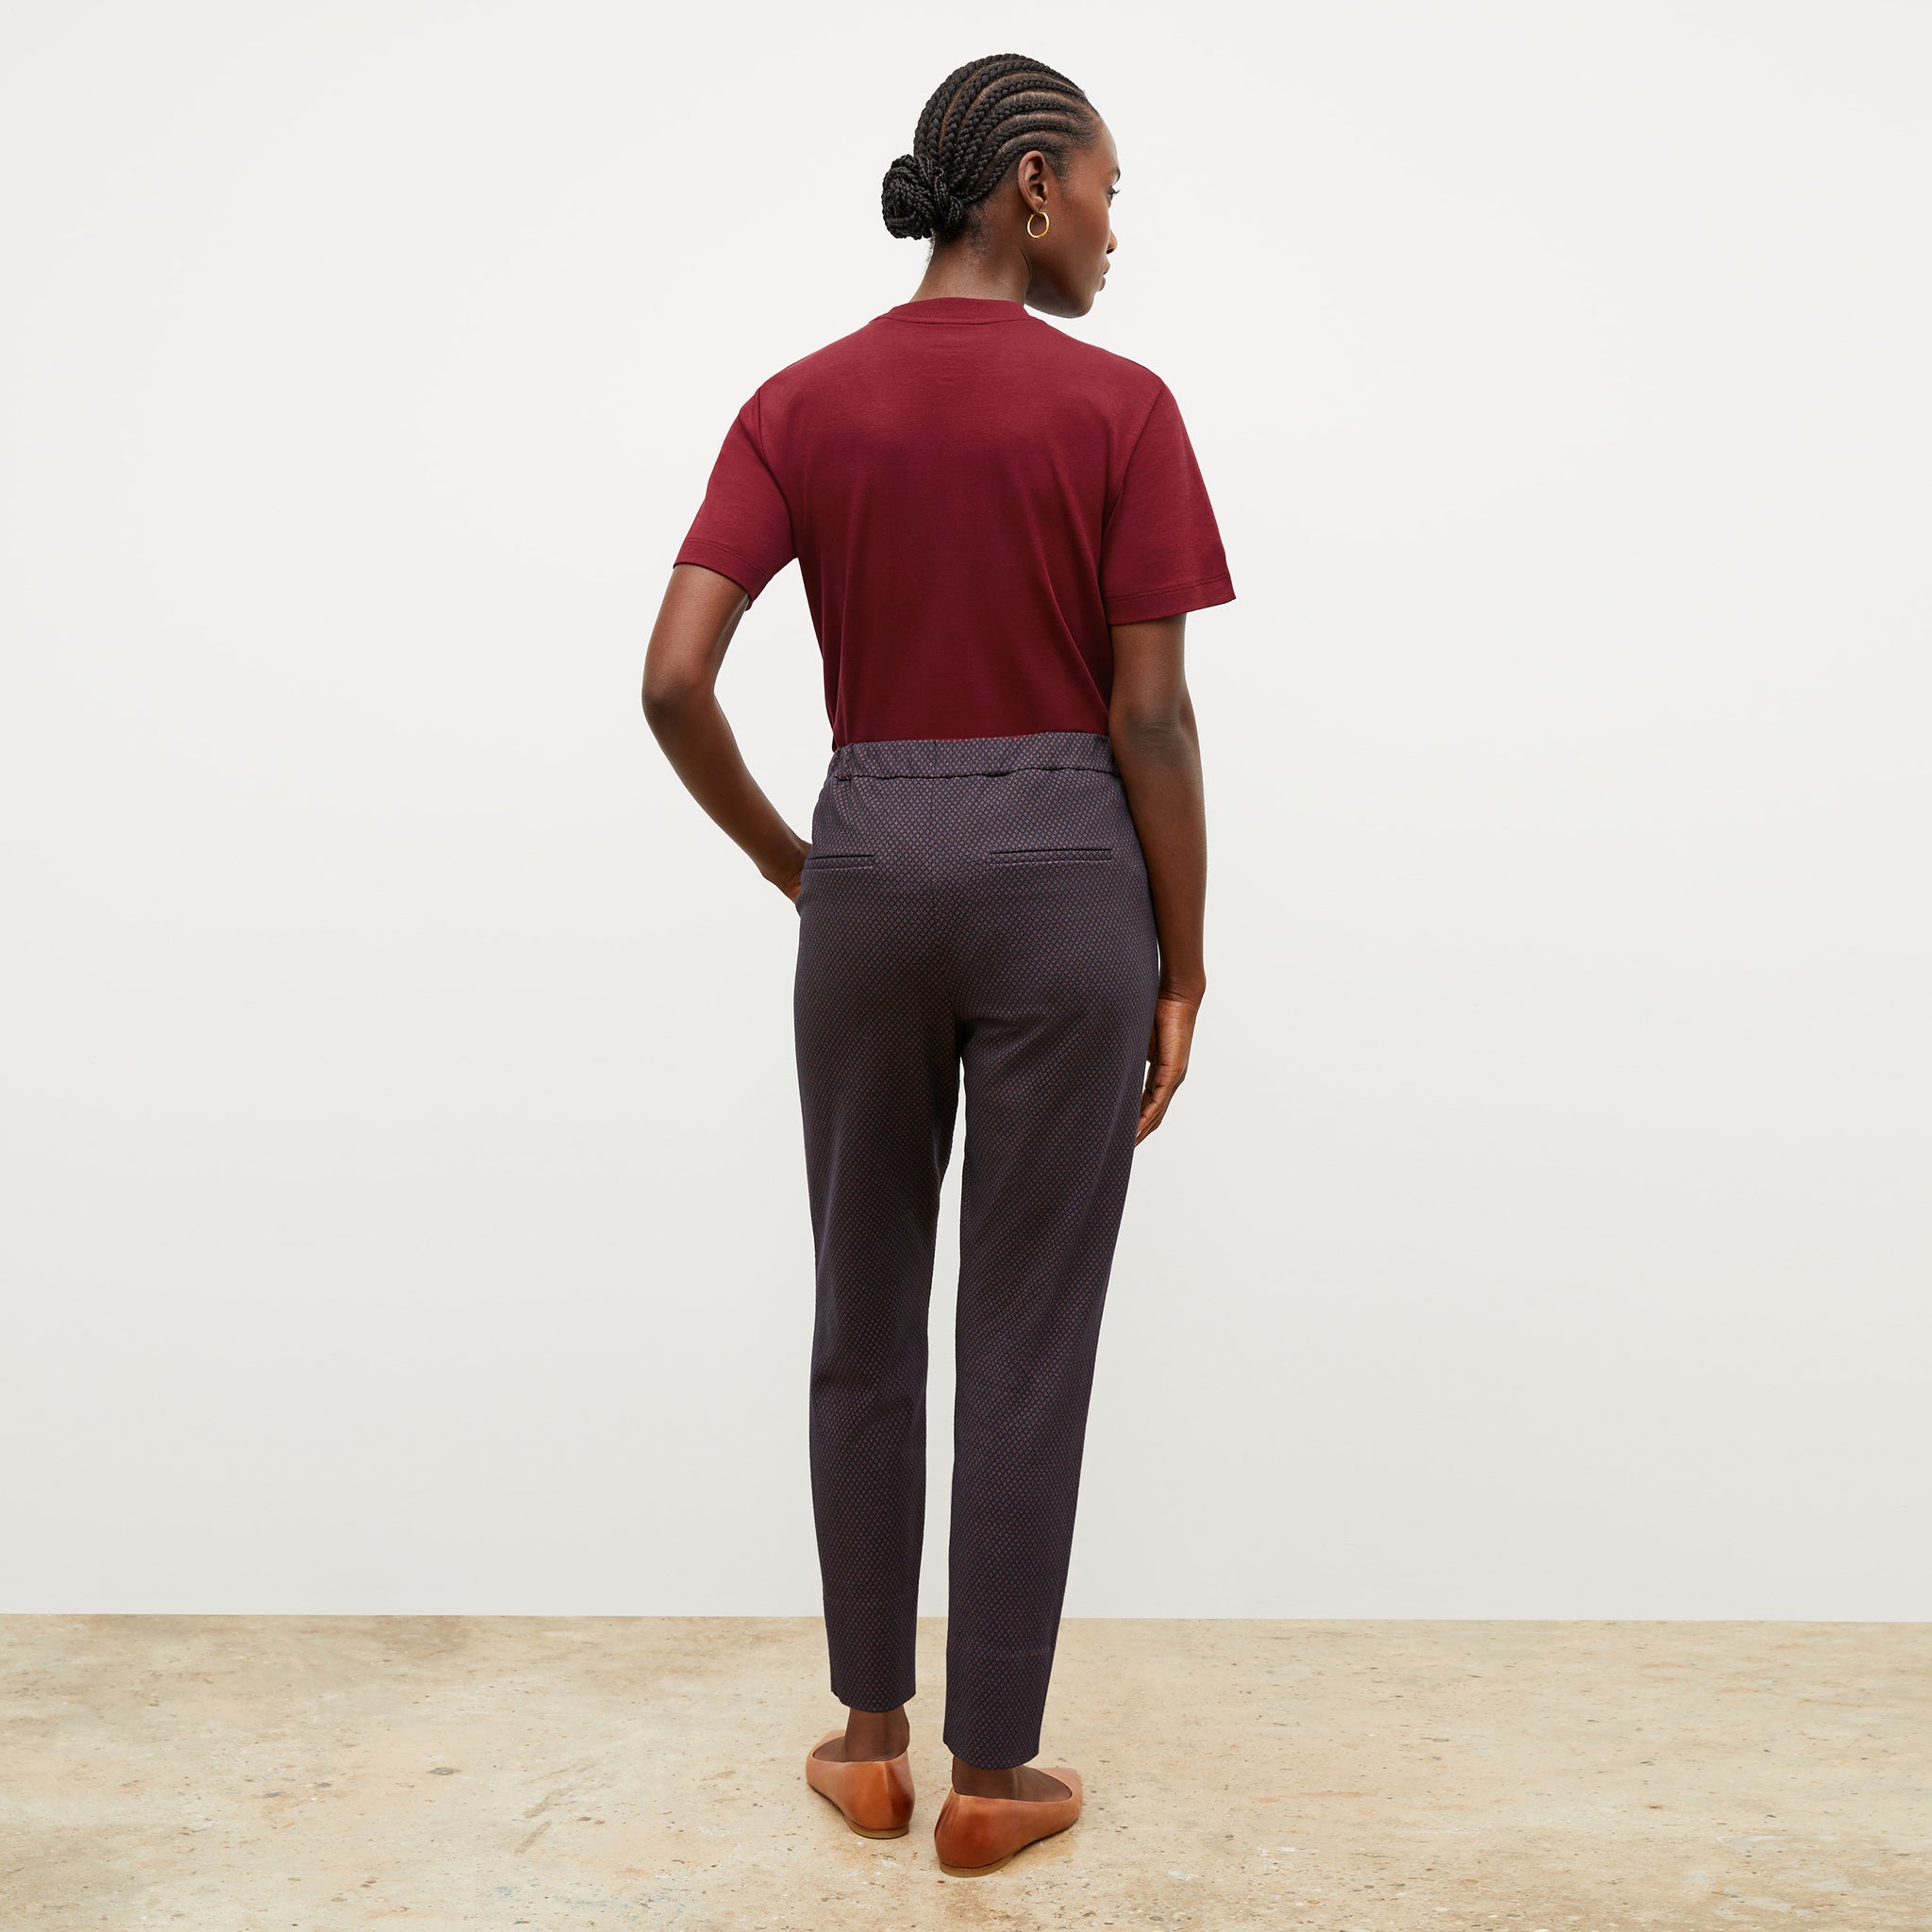 Back image of a woman wearing the leslie tshirt in maroon